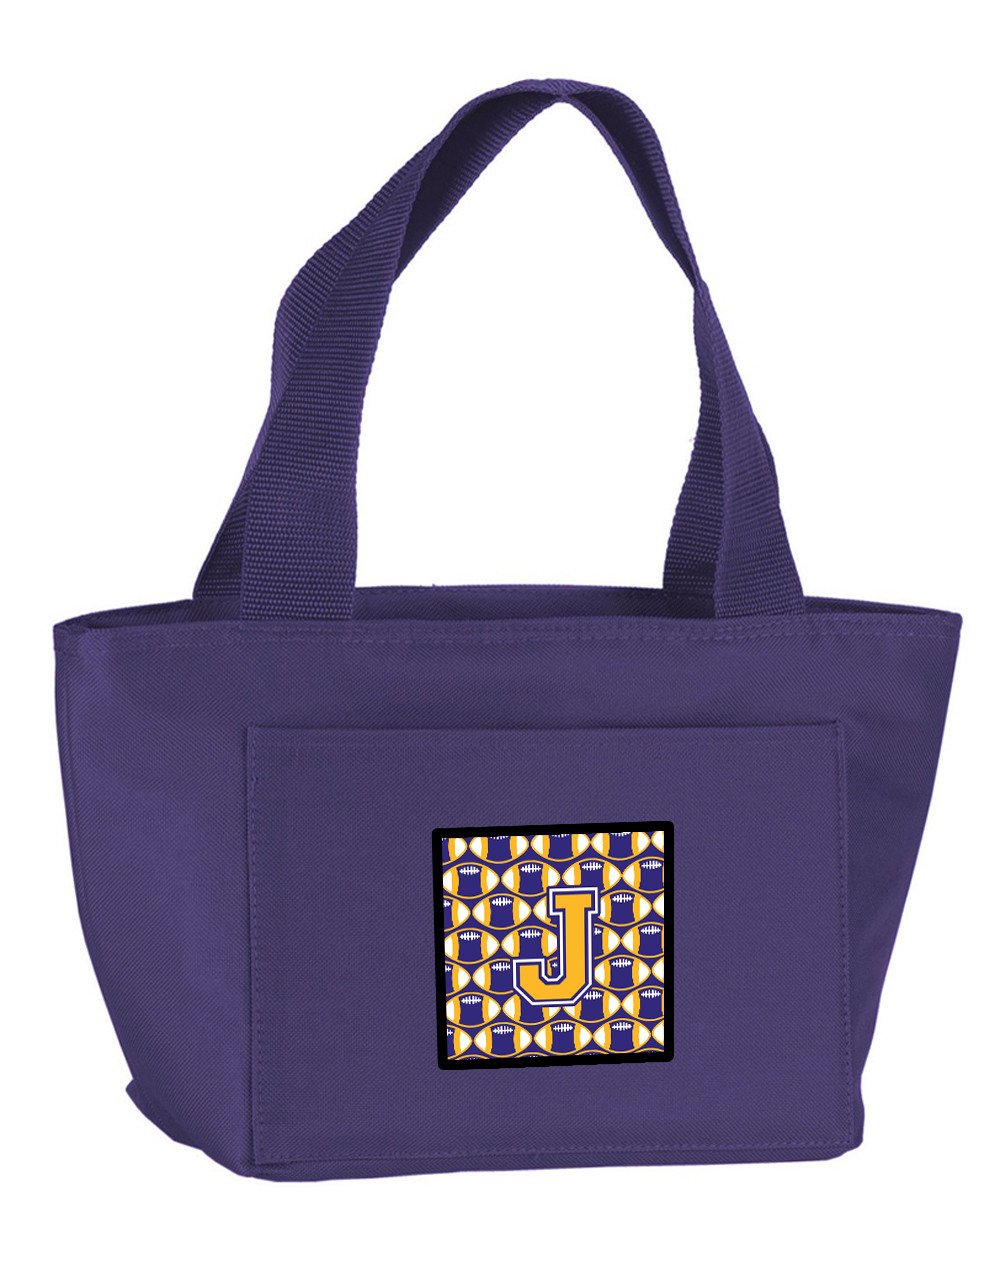 Letter J Football Purple and Gold Lunch Bag CJ1064-JPR-8808 by Caroline's Treasures